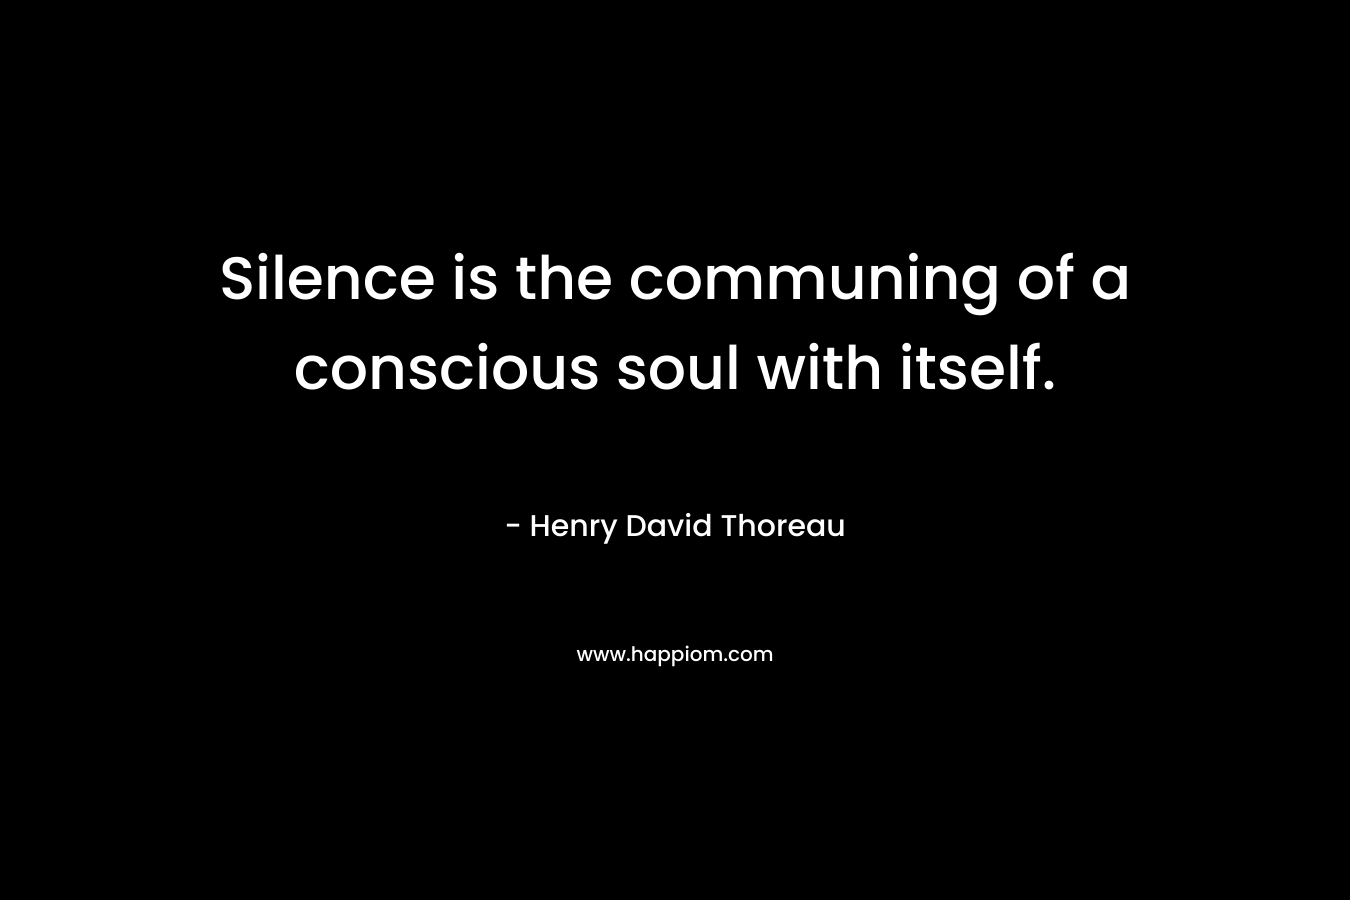 Silence is the communing of a conscious soul with itself. – Henry David Thoreau